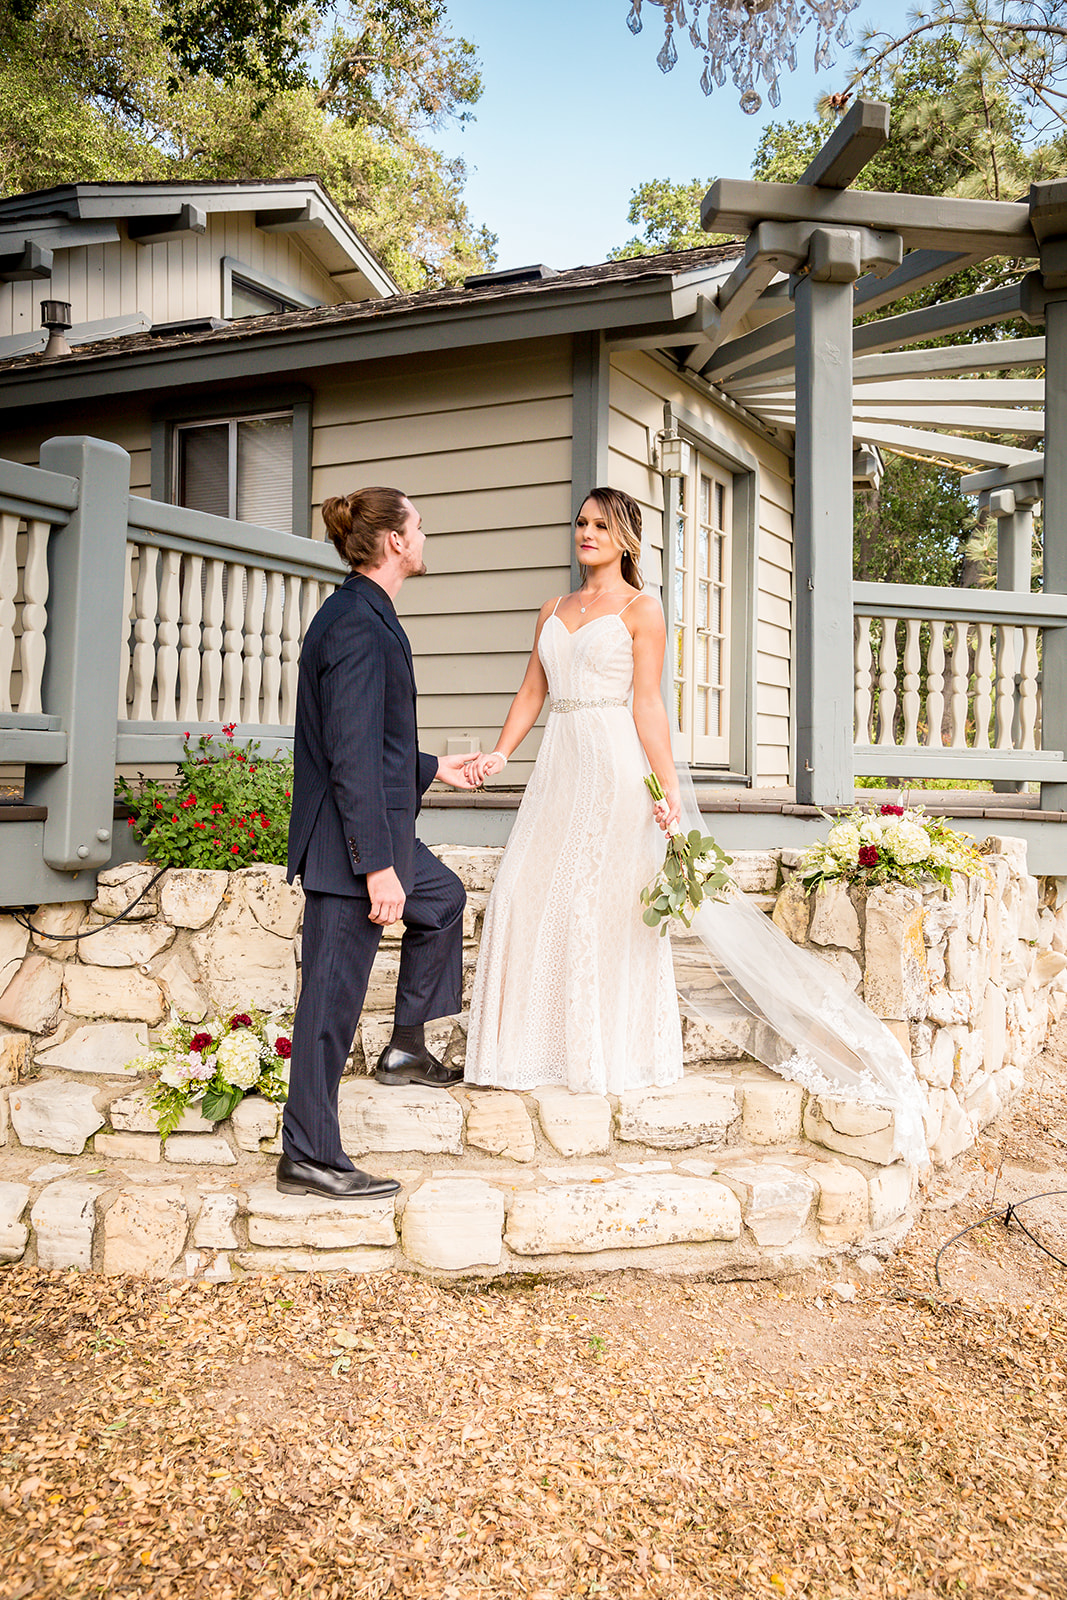 Portrait of bride and groom at small wedding on the Central Coast of California.